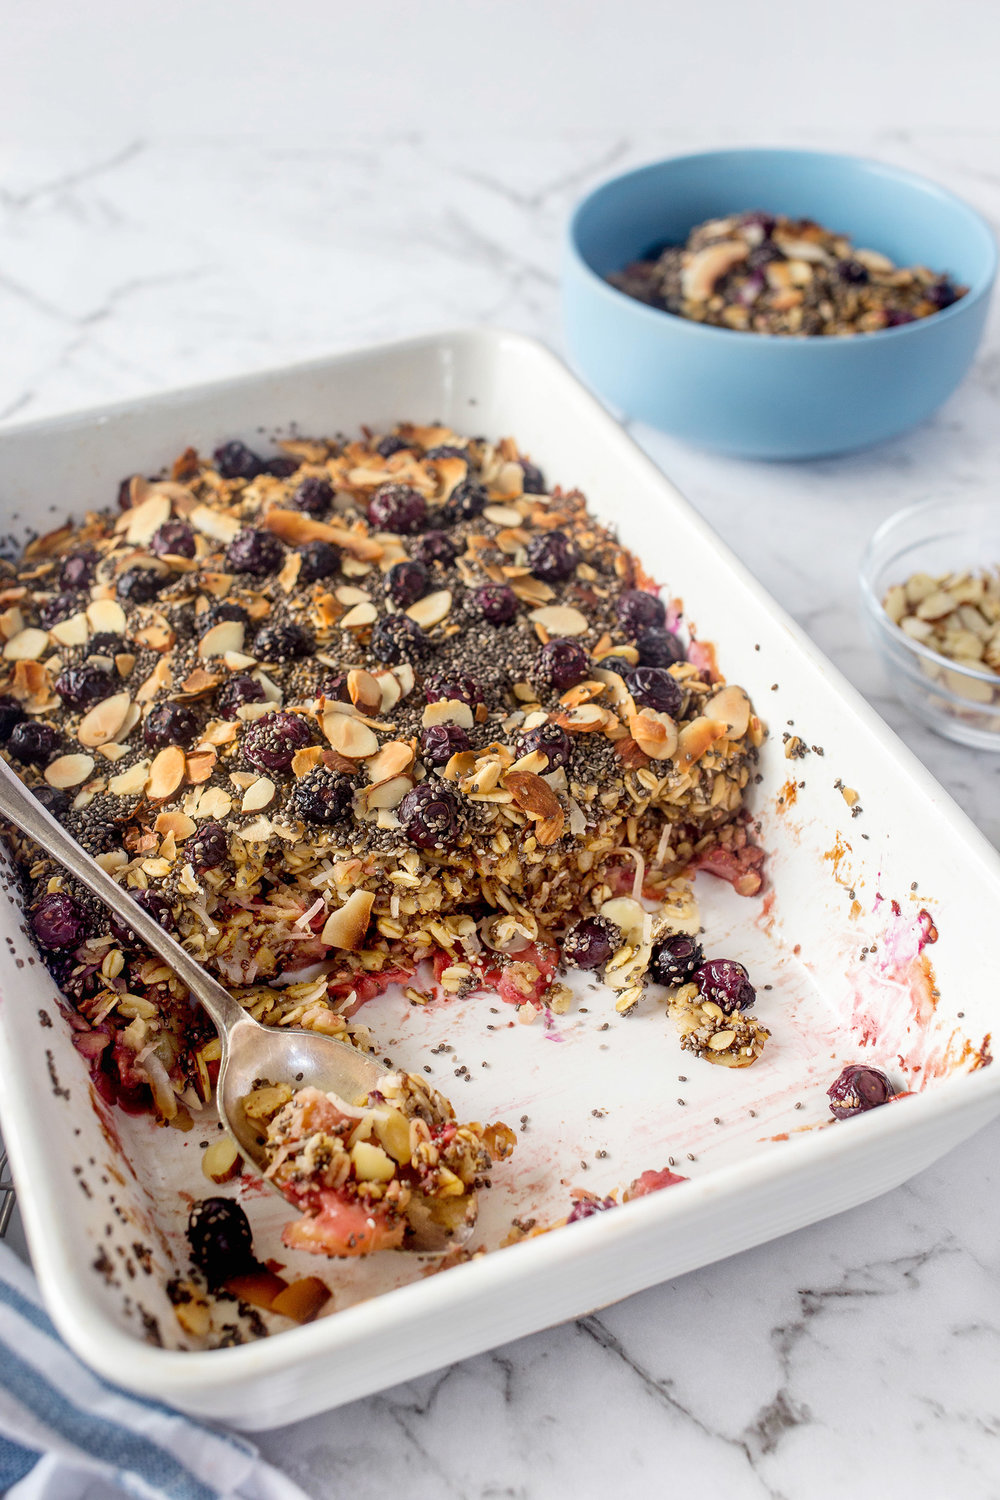 Blueberry Coconut Baked Oatmeal - Recipes - Lip-Smacking Food